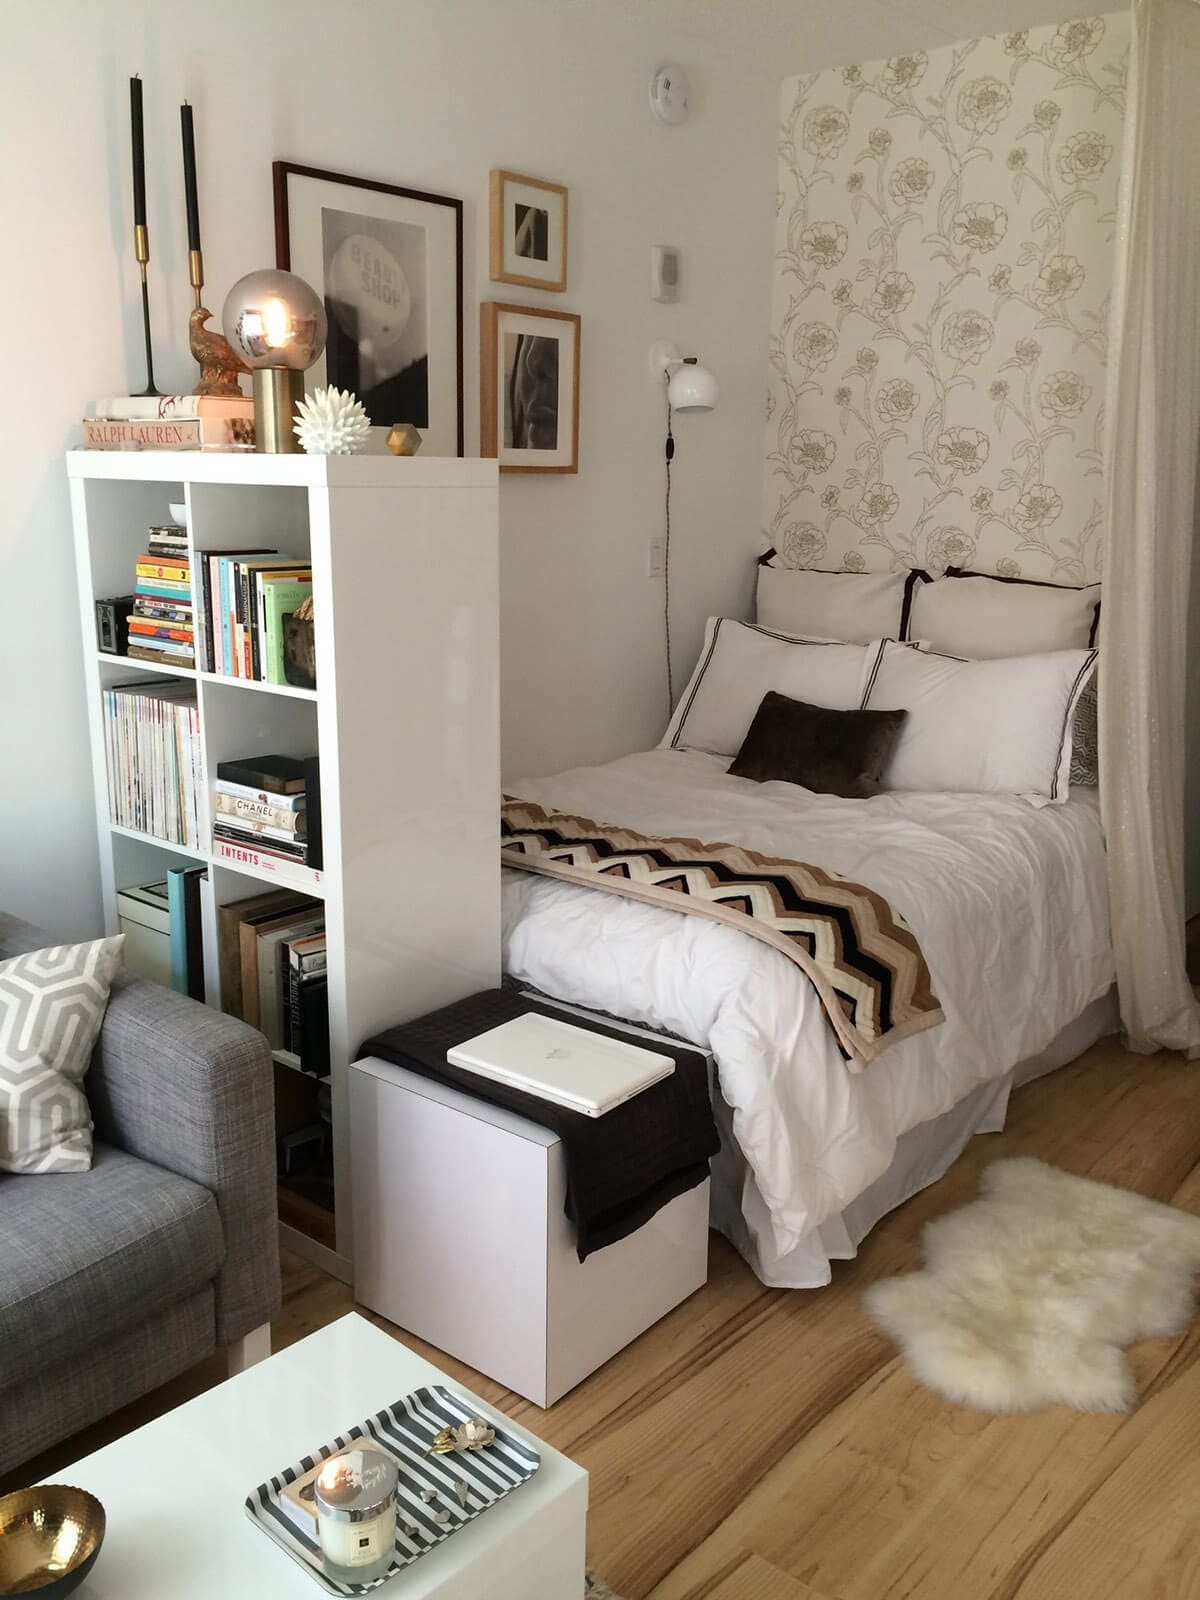 23 bedroom designs to maximize your small space - 81